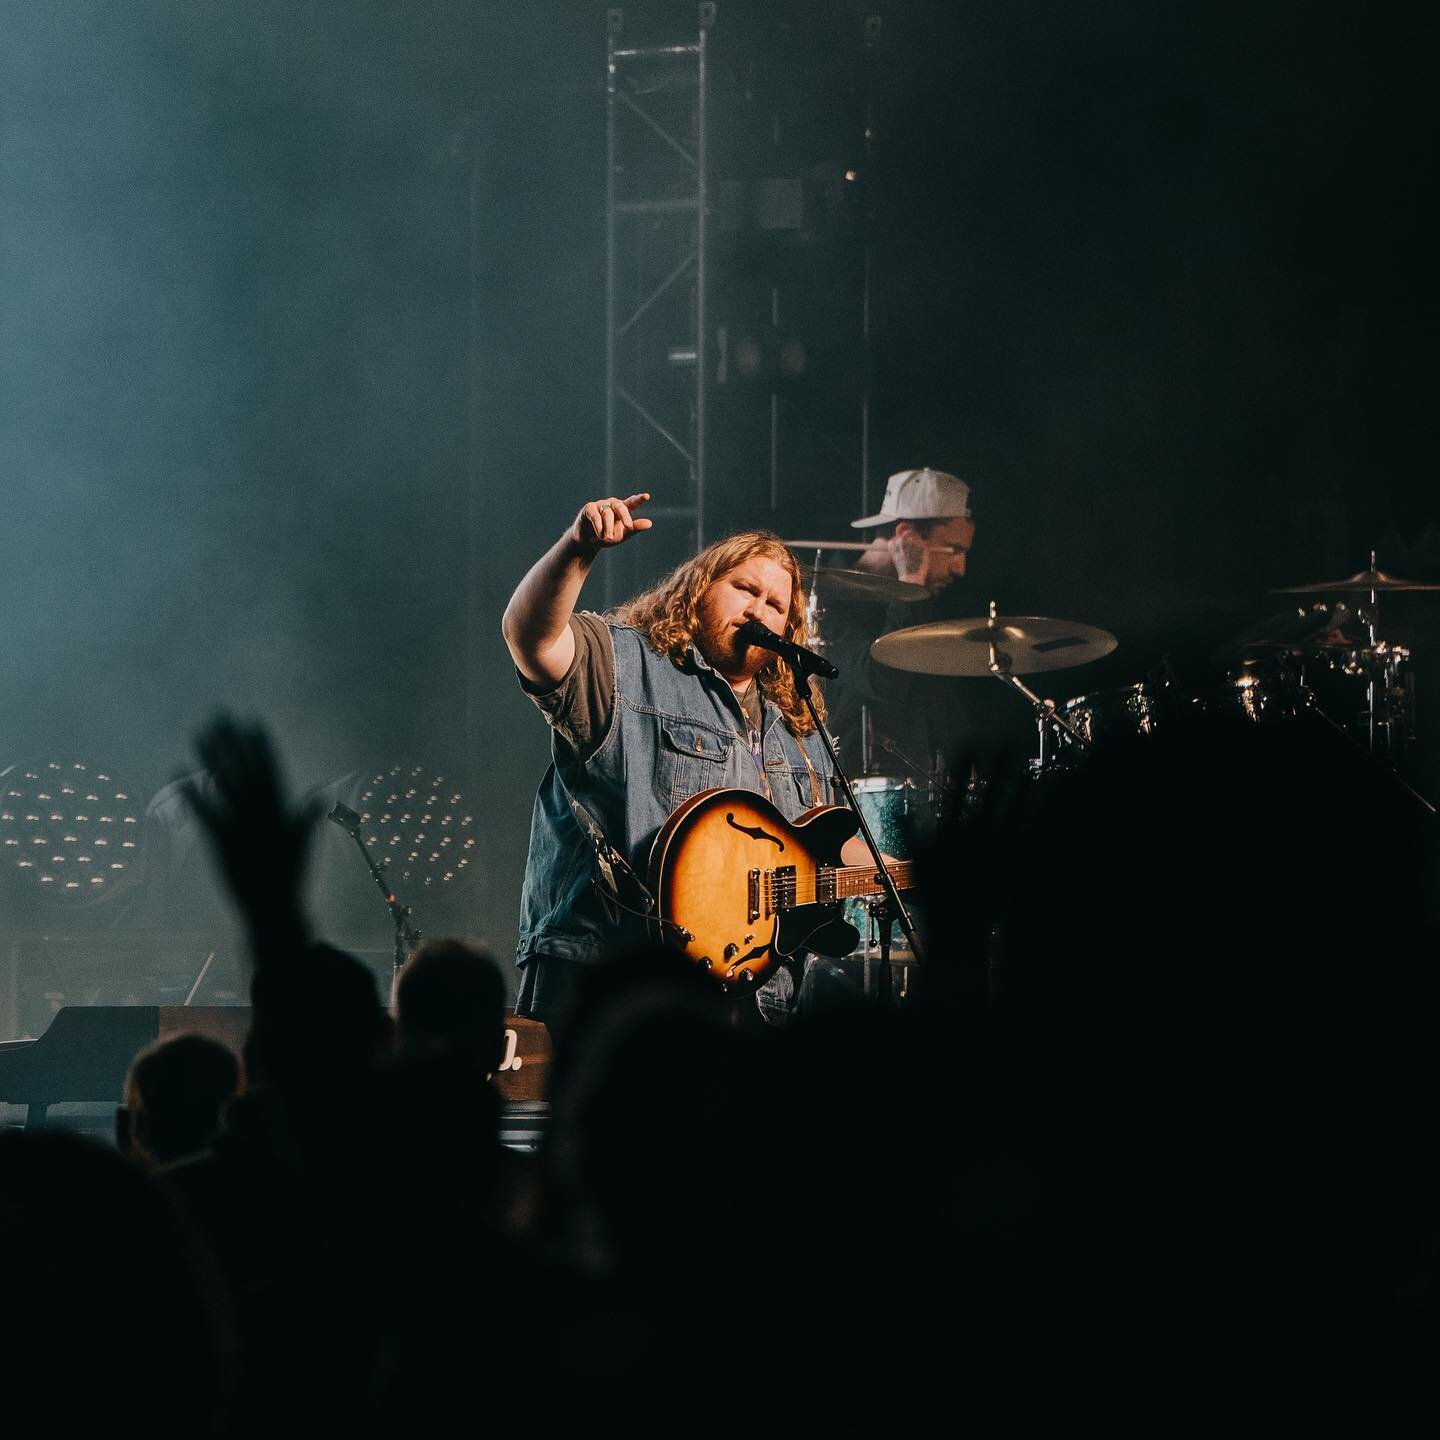 Pre-buy your tickets NOW for the Together Again&hellip;Again Tour with MercyMe and Crowder!  Use code: RUNNING HOME at mercyme.org to grab yours while it lasts. Presale ends Thursday, March 28 at 11:59p local time.

⭐ Presale code: RUNNING HOME⭐

Swi